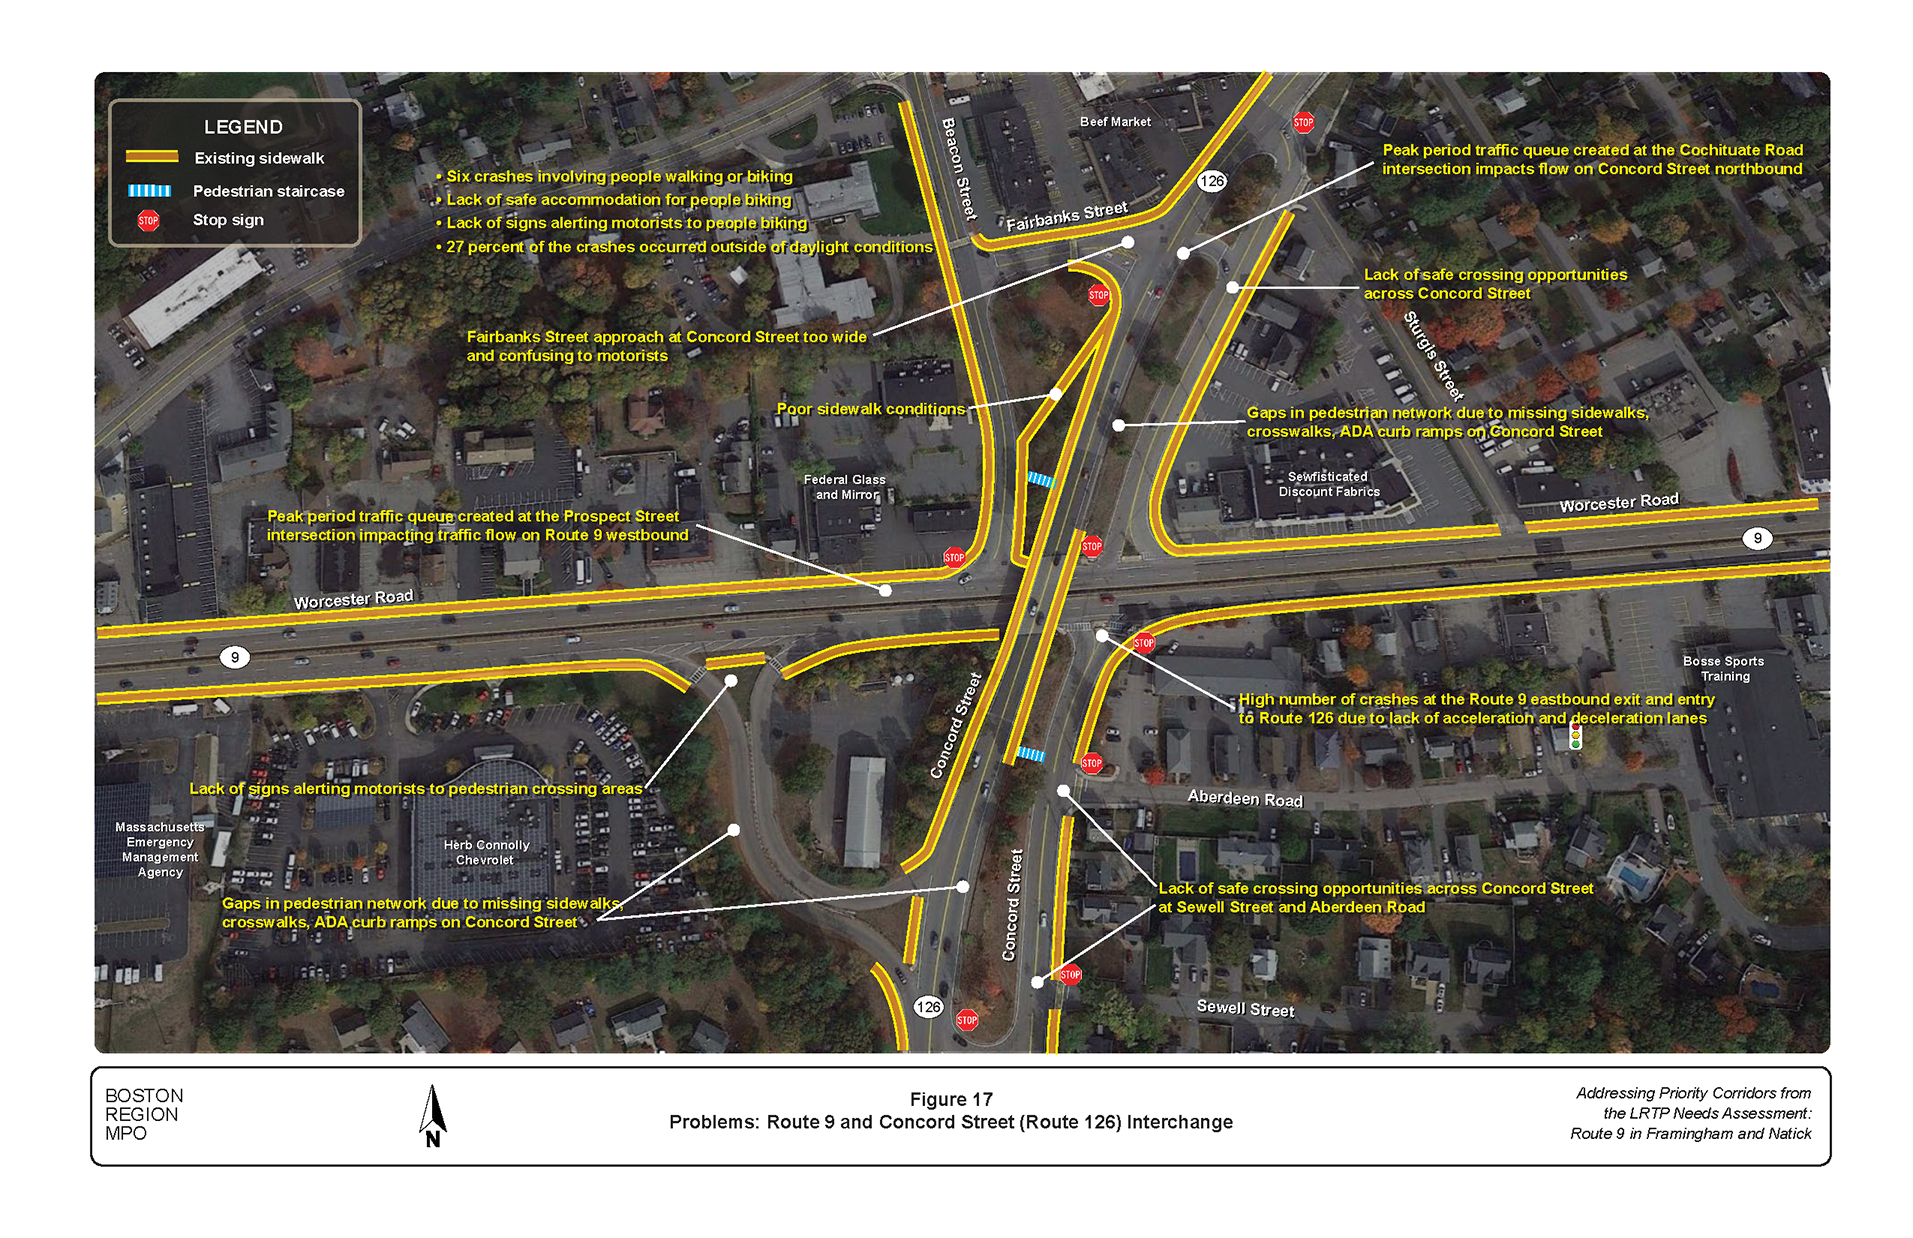 Figure 17 is an aerial photo showing the interchange of Route 9 and Concord Street (Route 126) and the problems